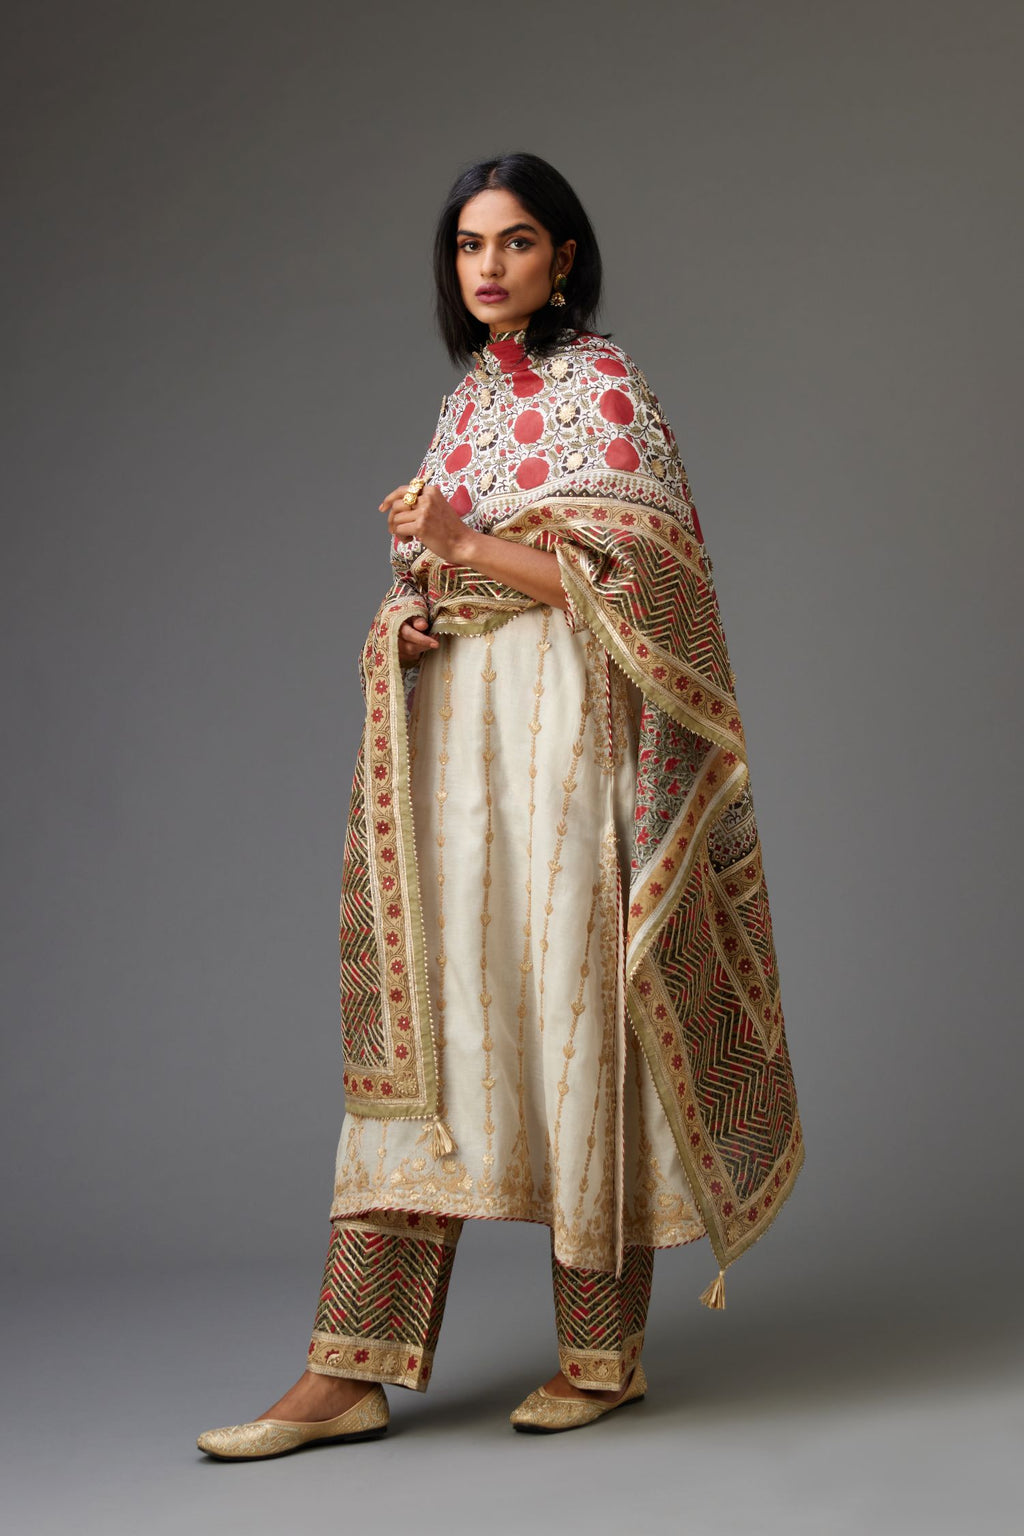 Off white cotton chanderi straight kurta set with all over heavy dori and gota embroidery work, highlighted with gold sequin work.